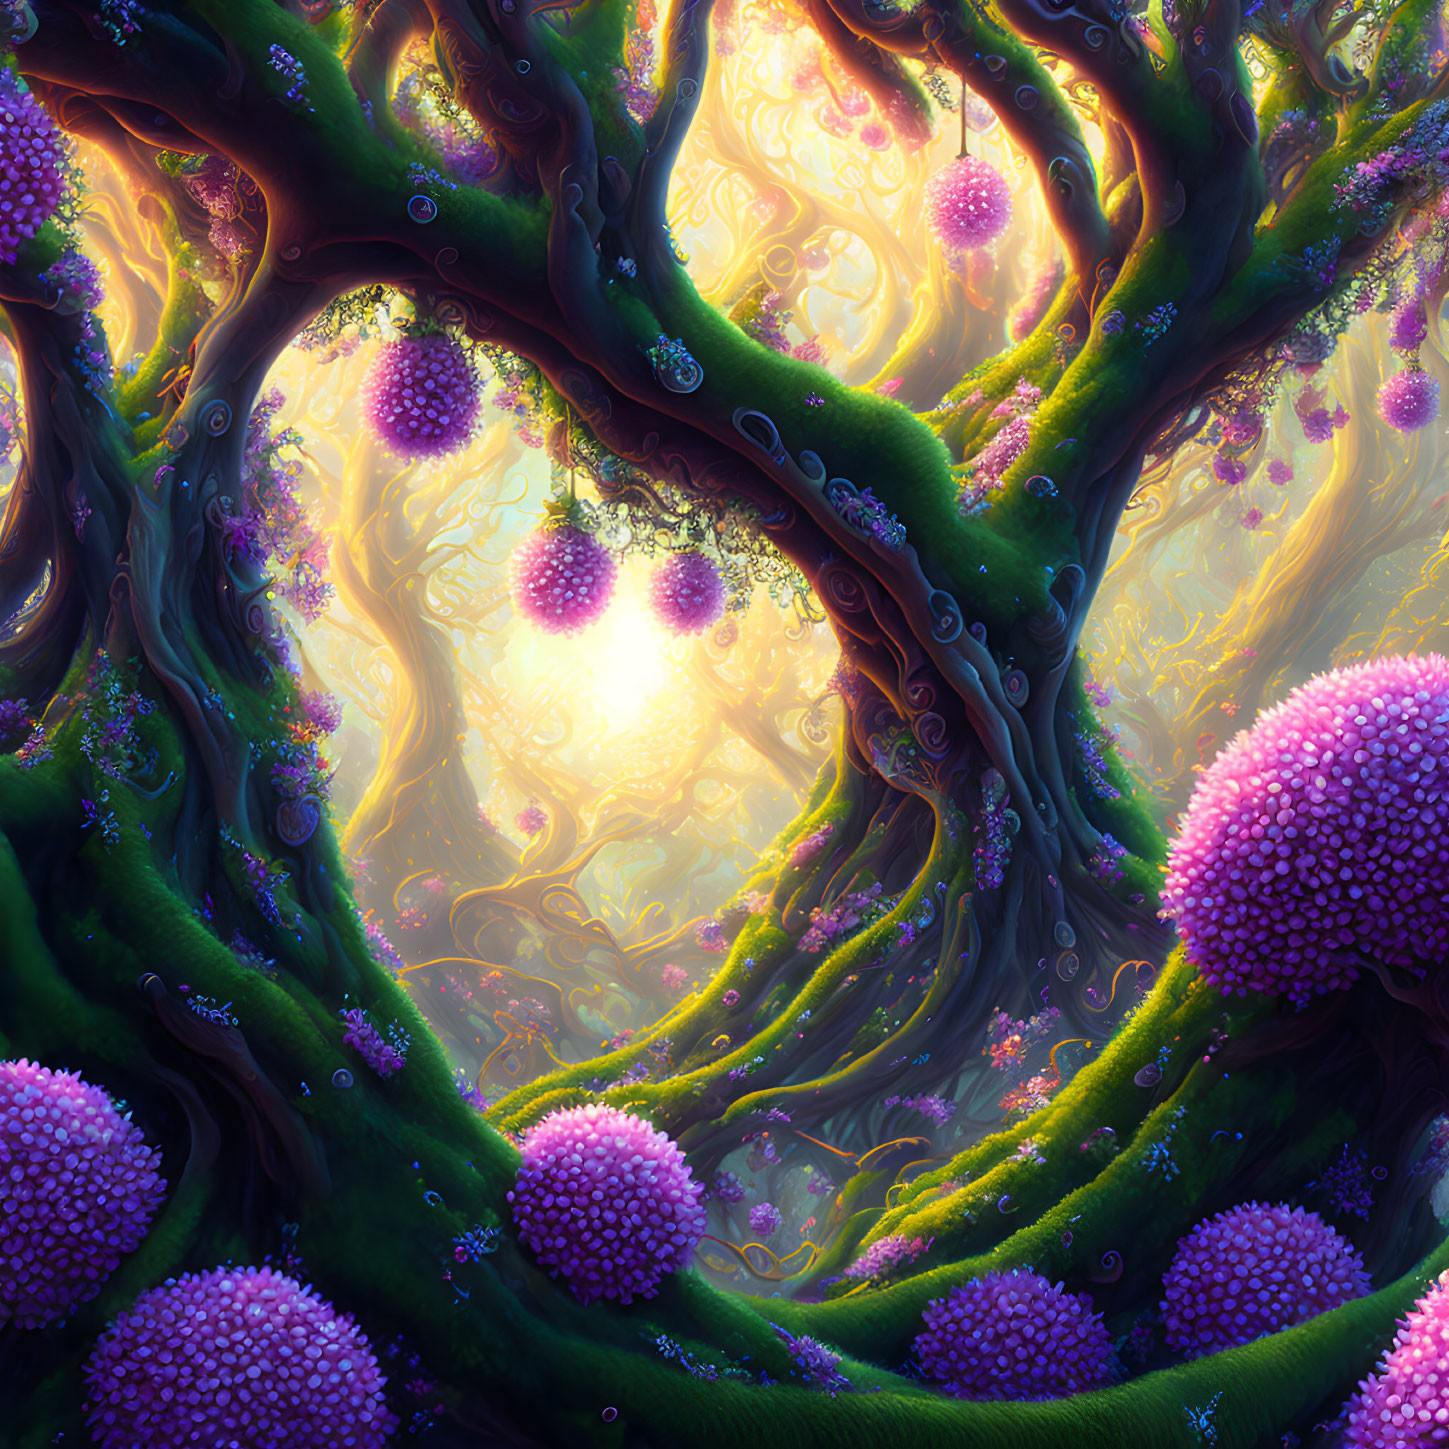 Fantastical forest with glowing orbs and golden light